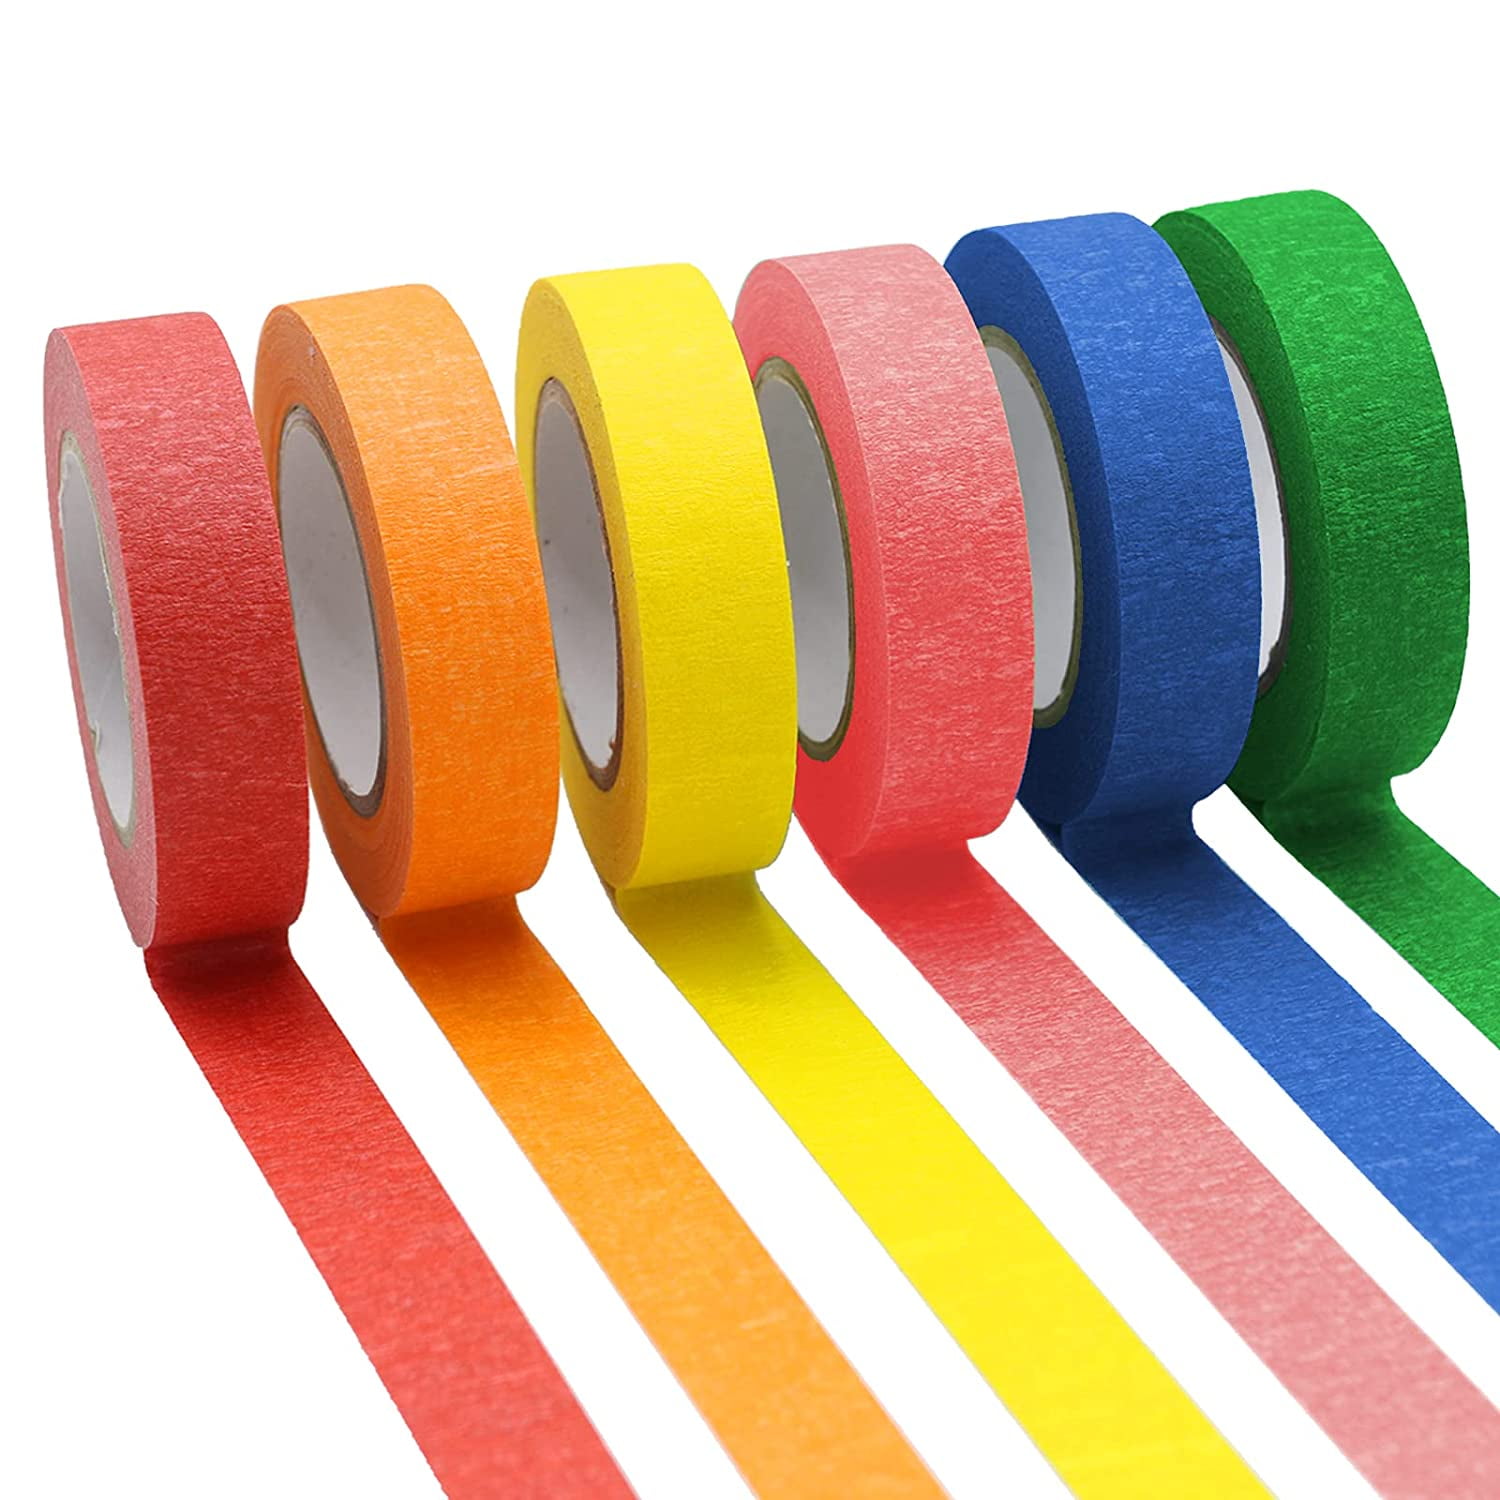 TBMT01-10P skytogether Colored Masking Tape 1 Inch Wide, Rainbow Color  Masking Tape Colorful Masking Tape Colored Tape Rolls for Kids Class